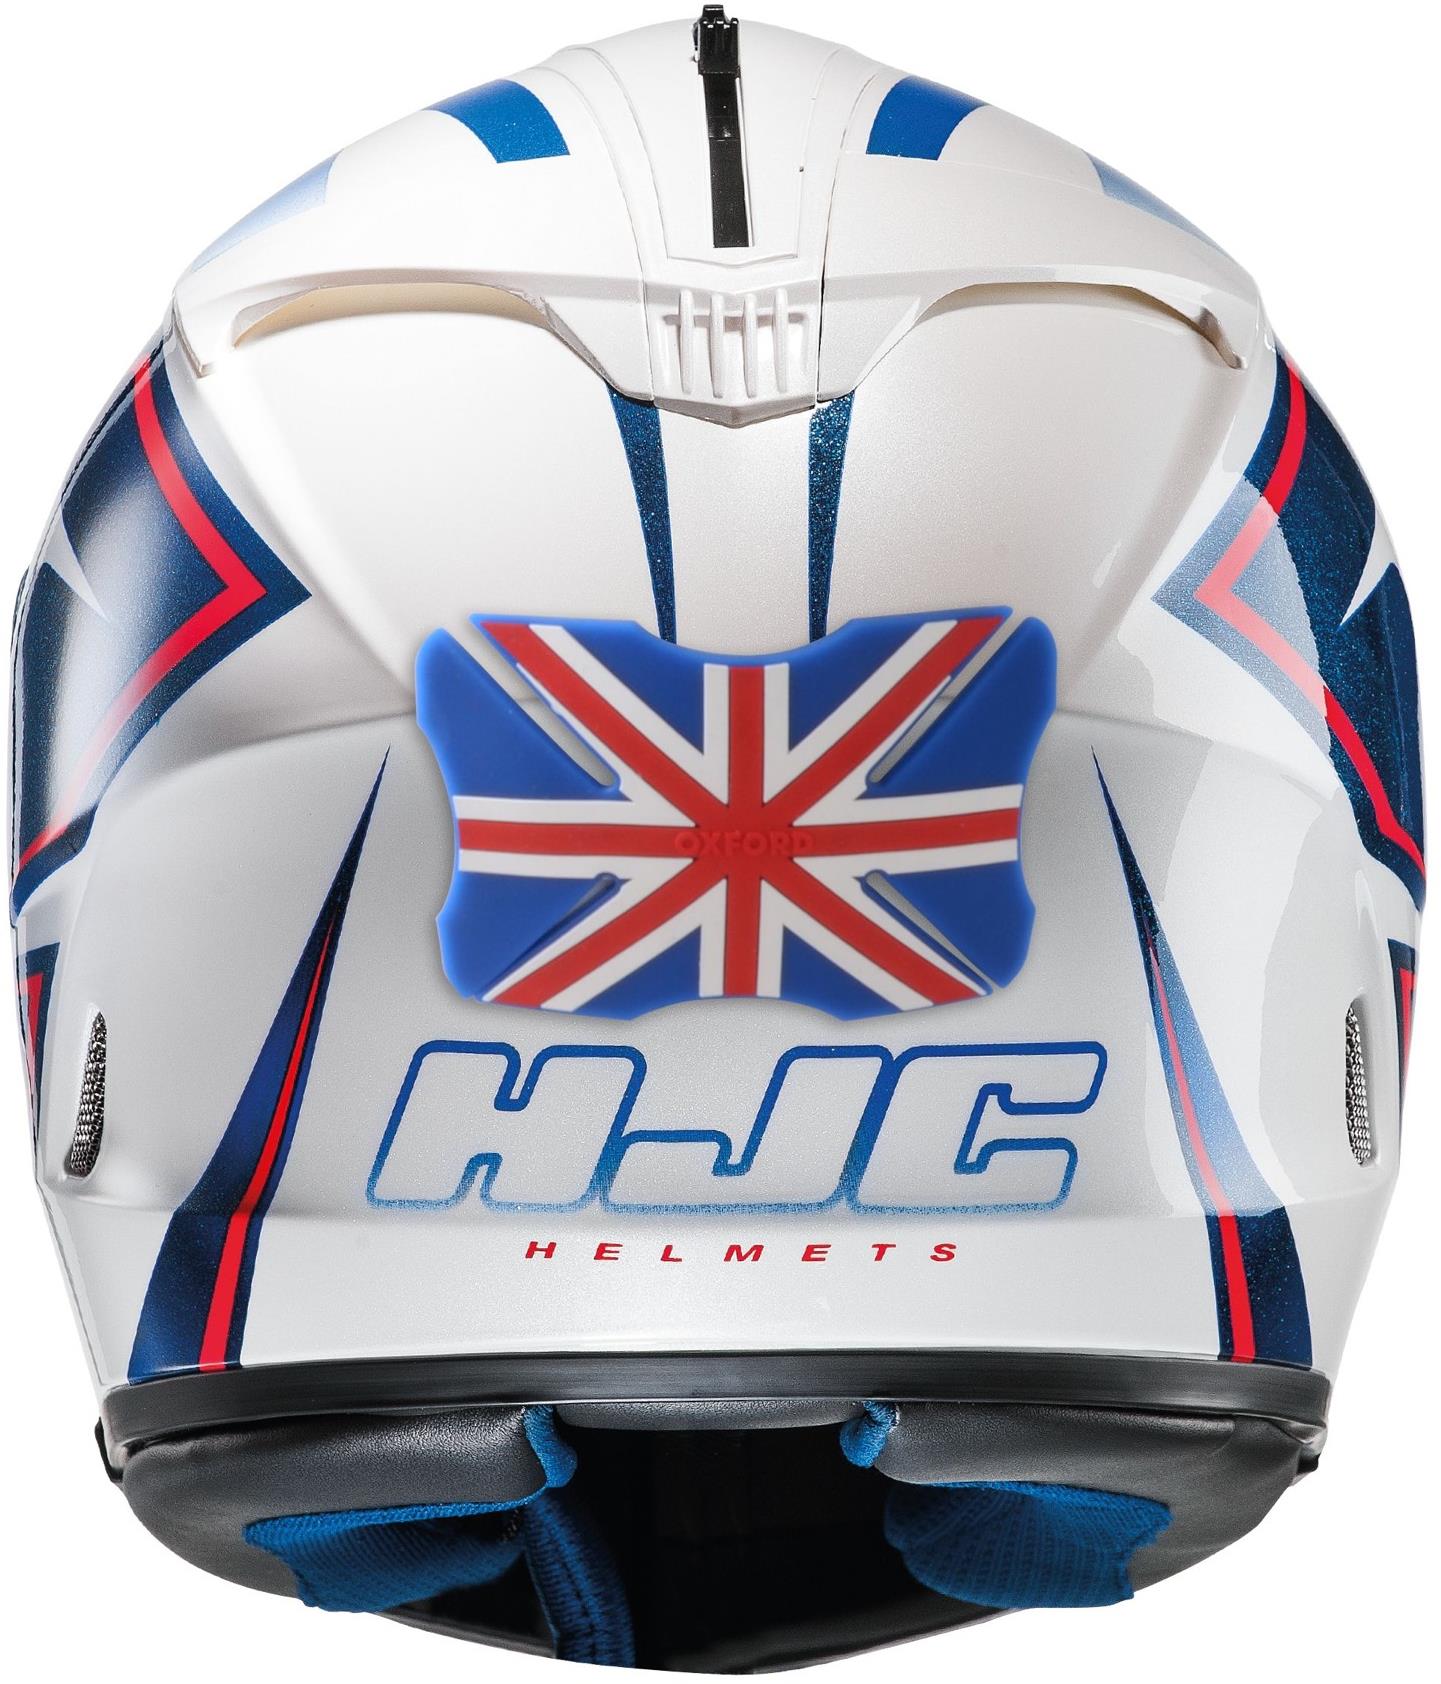 Pare-chocs casque ride on - Oxford